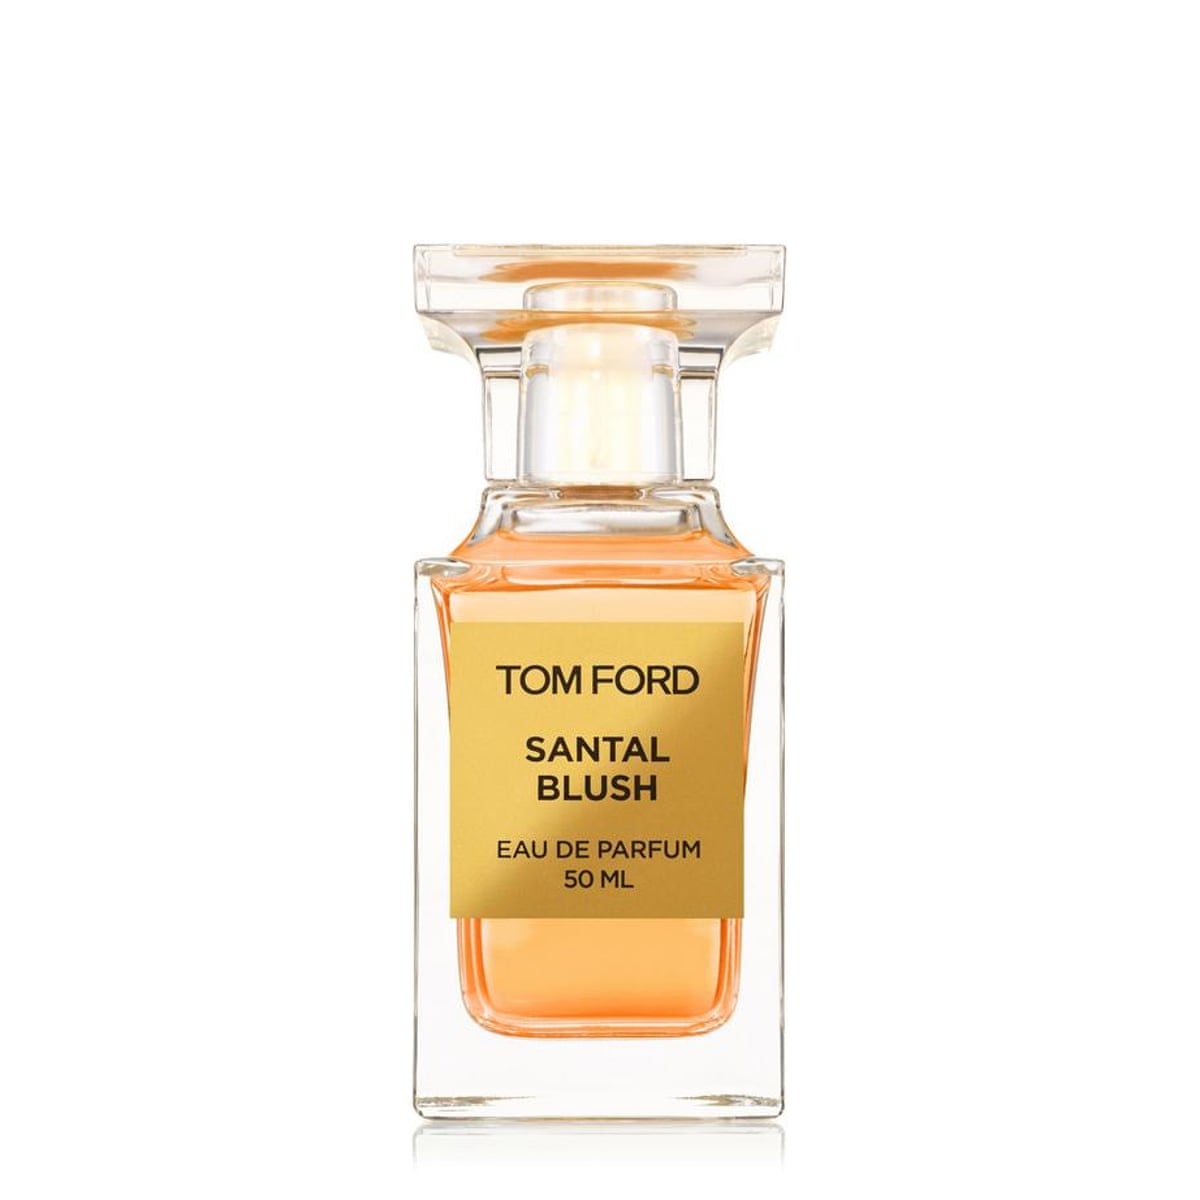 My perfume safari – searching for scents outside fancy international cities, Life and style